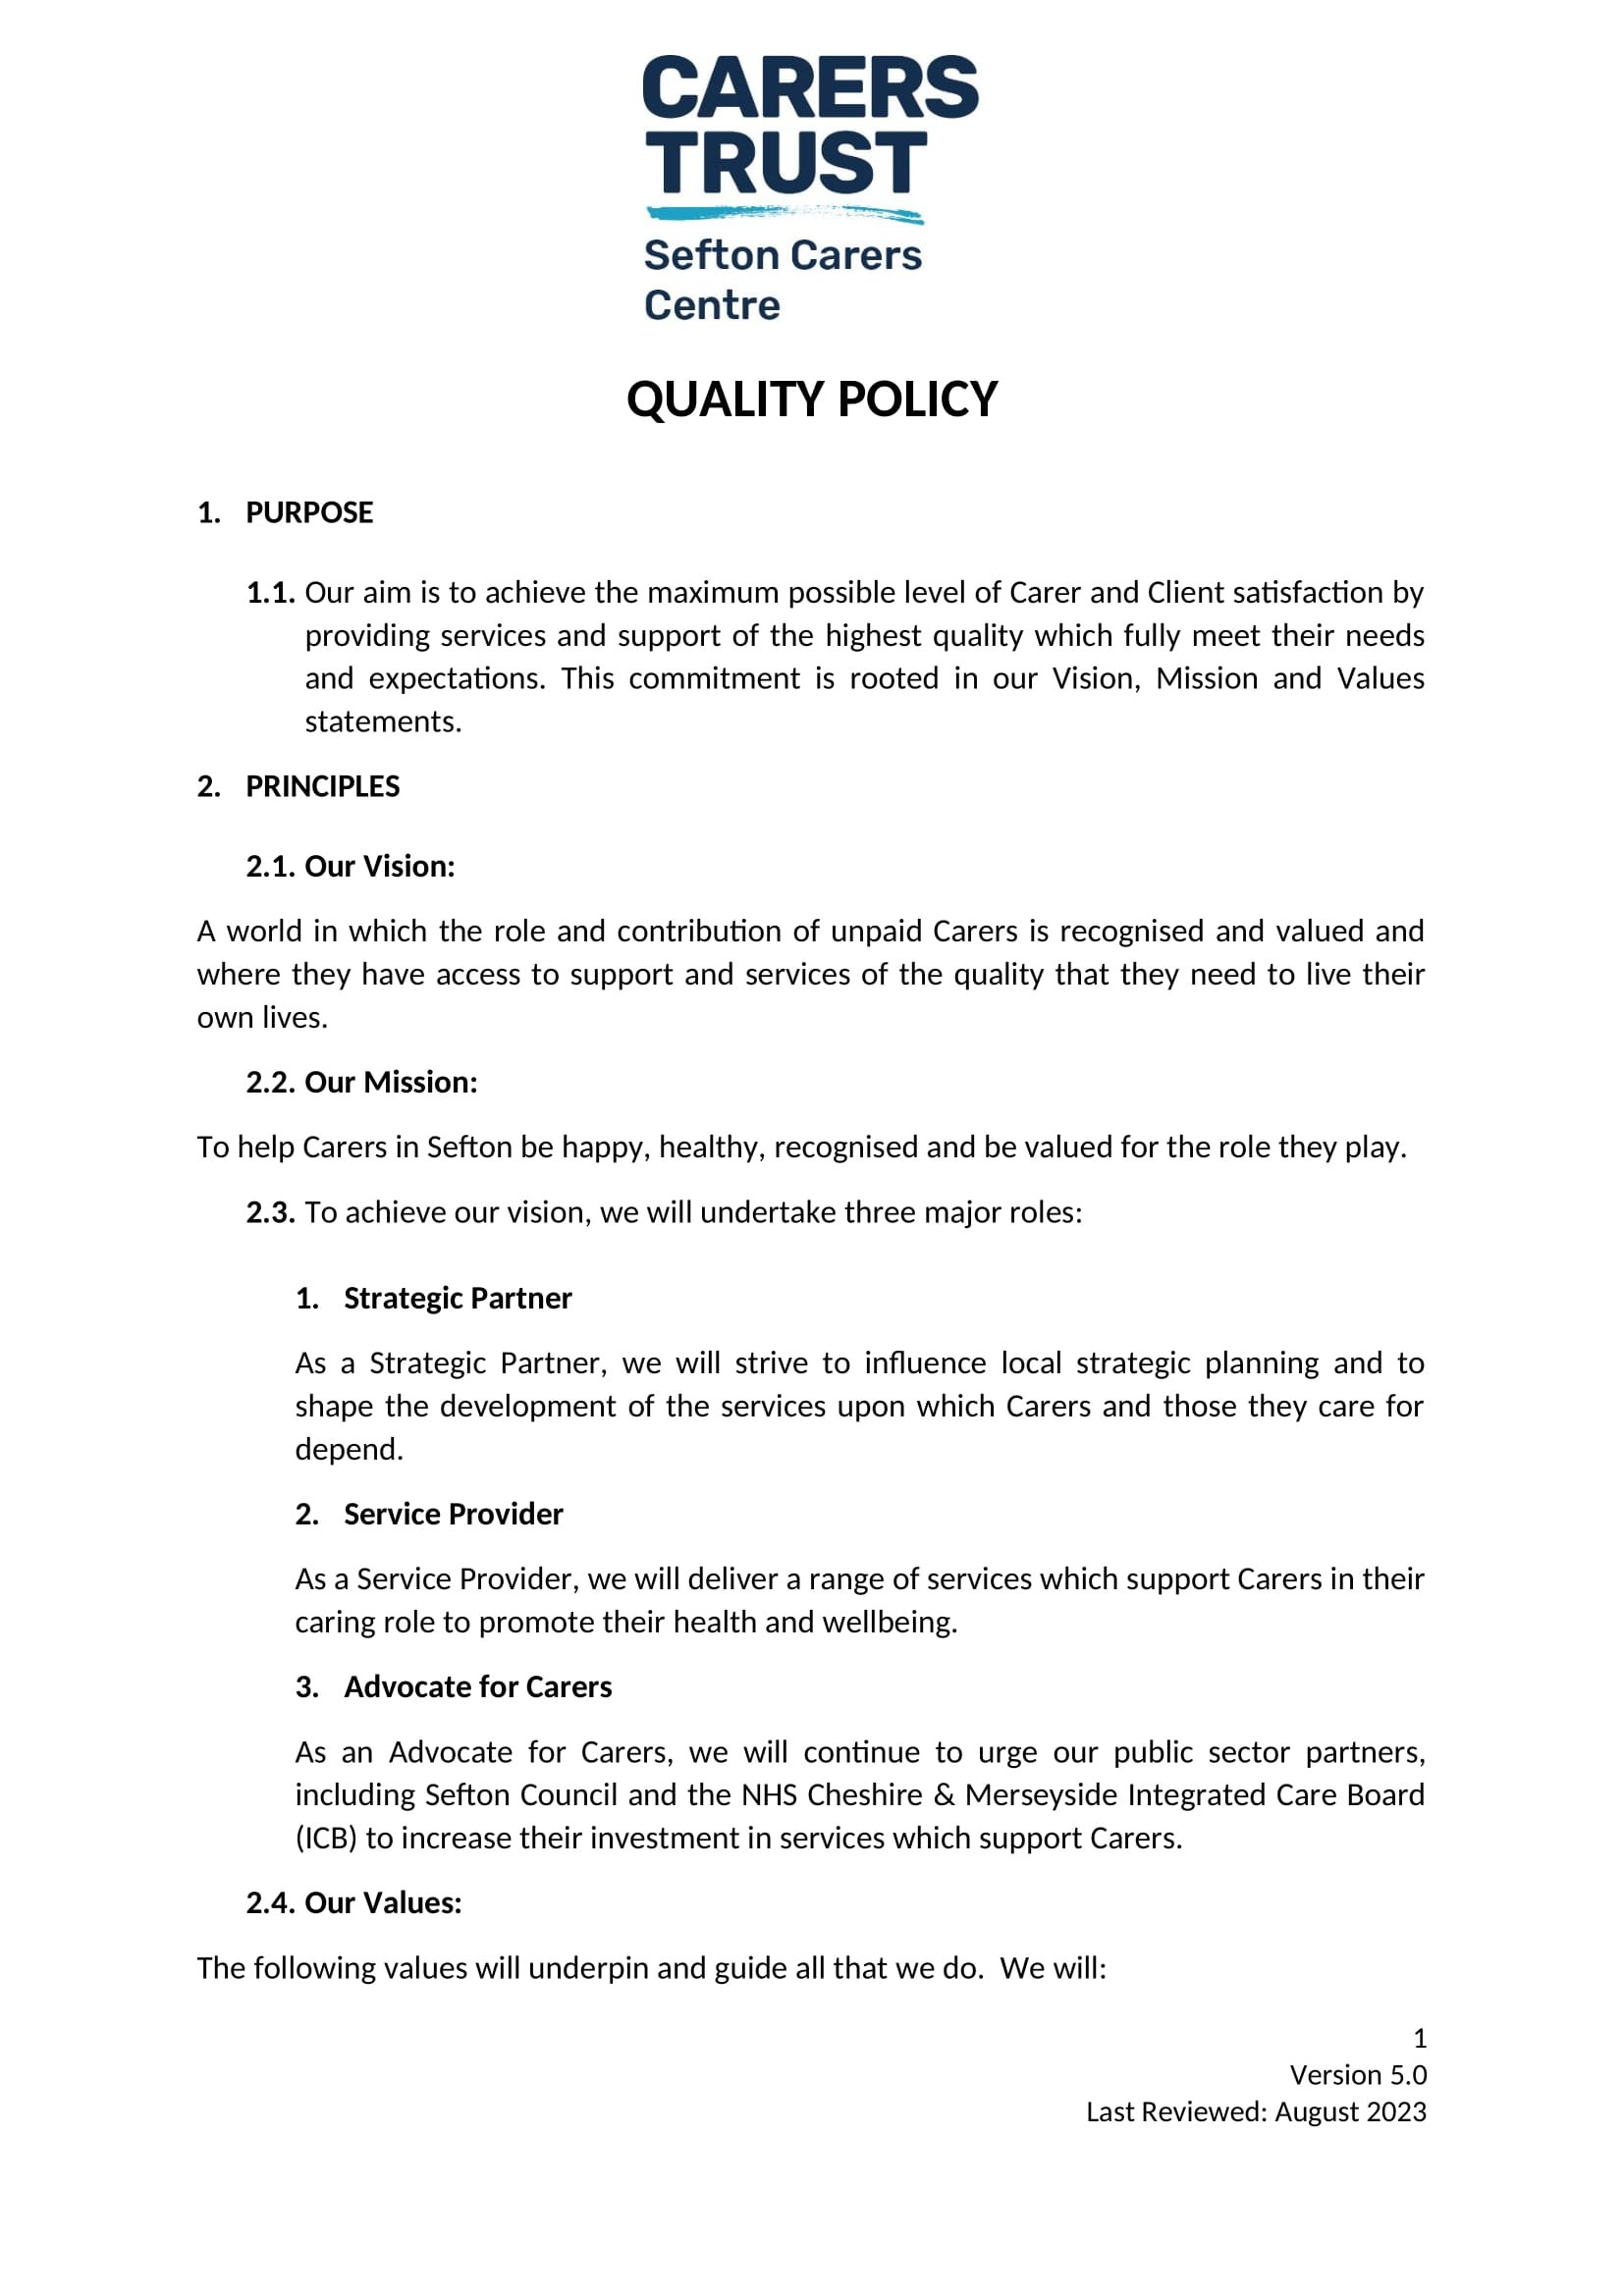 Quality Policy Aug 23 1